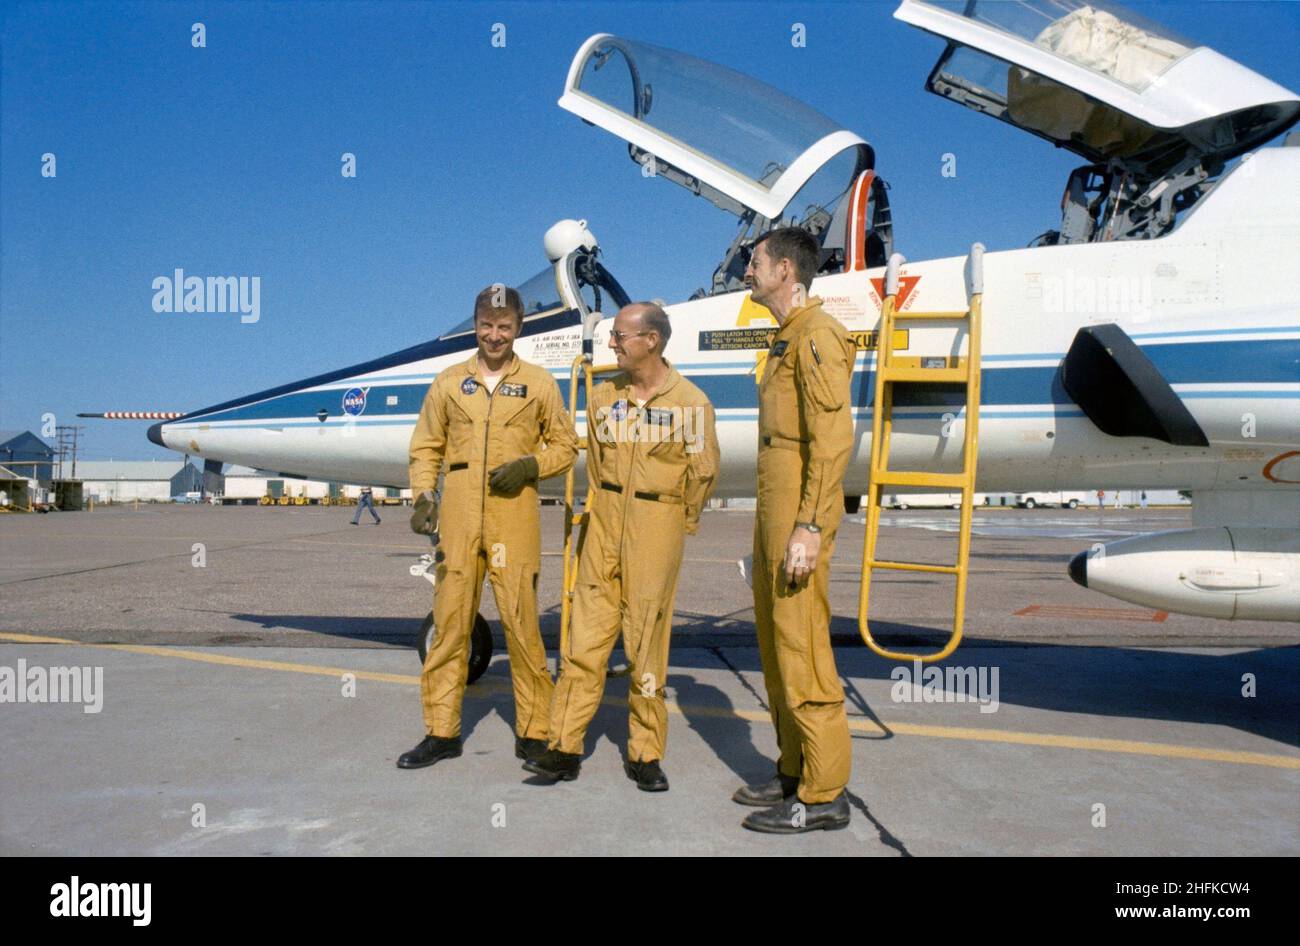 (13 May 1973) --- Members of the prime crew of the first manned Skylab Mission (Skylab 2) stand beside a NASA T-38 jet aircraft trainer at nearby Ellington Air Force Base prior to take off for the Kennedy Space Center, Florida. They are (left to right) astronauts Paul J. Weitz, mission pilot; Charles Conrad Jr., commander; and scientist Joseph P. Kerwin, science pilot. The three crewmen have completed their prelaunch training at JSC Stock Photo